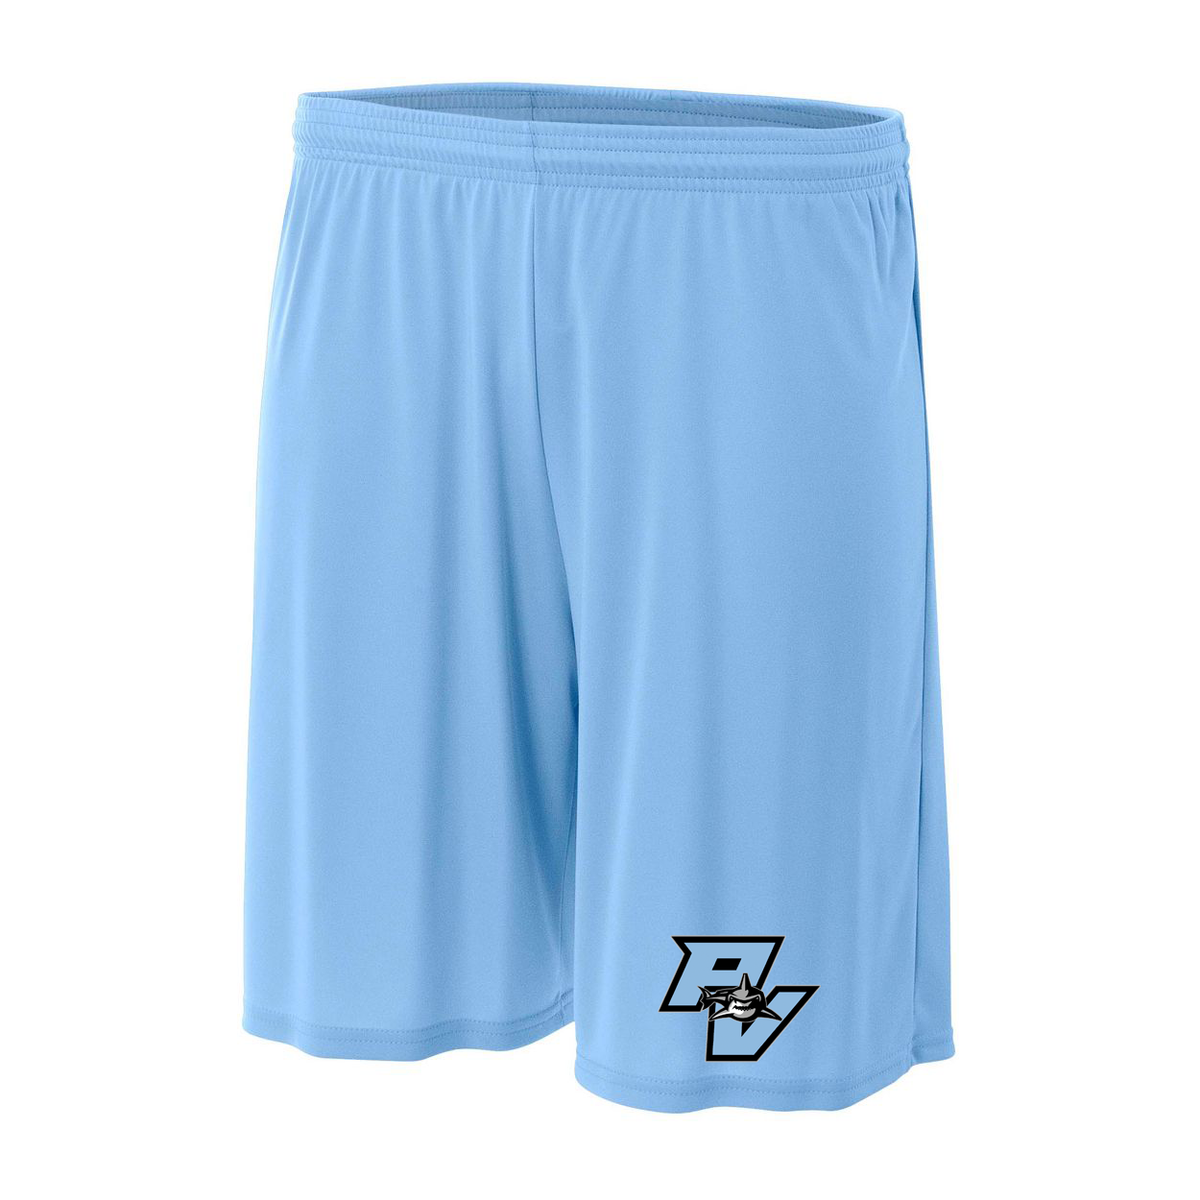 Ponte Vedra JAWS Lacrosse Cooling 7" Performance Shorts